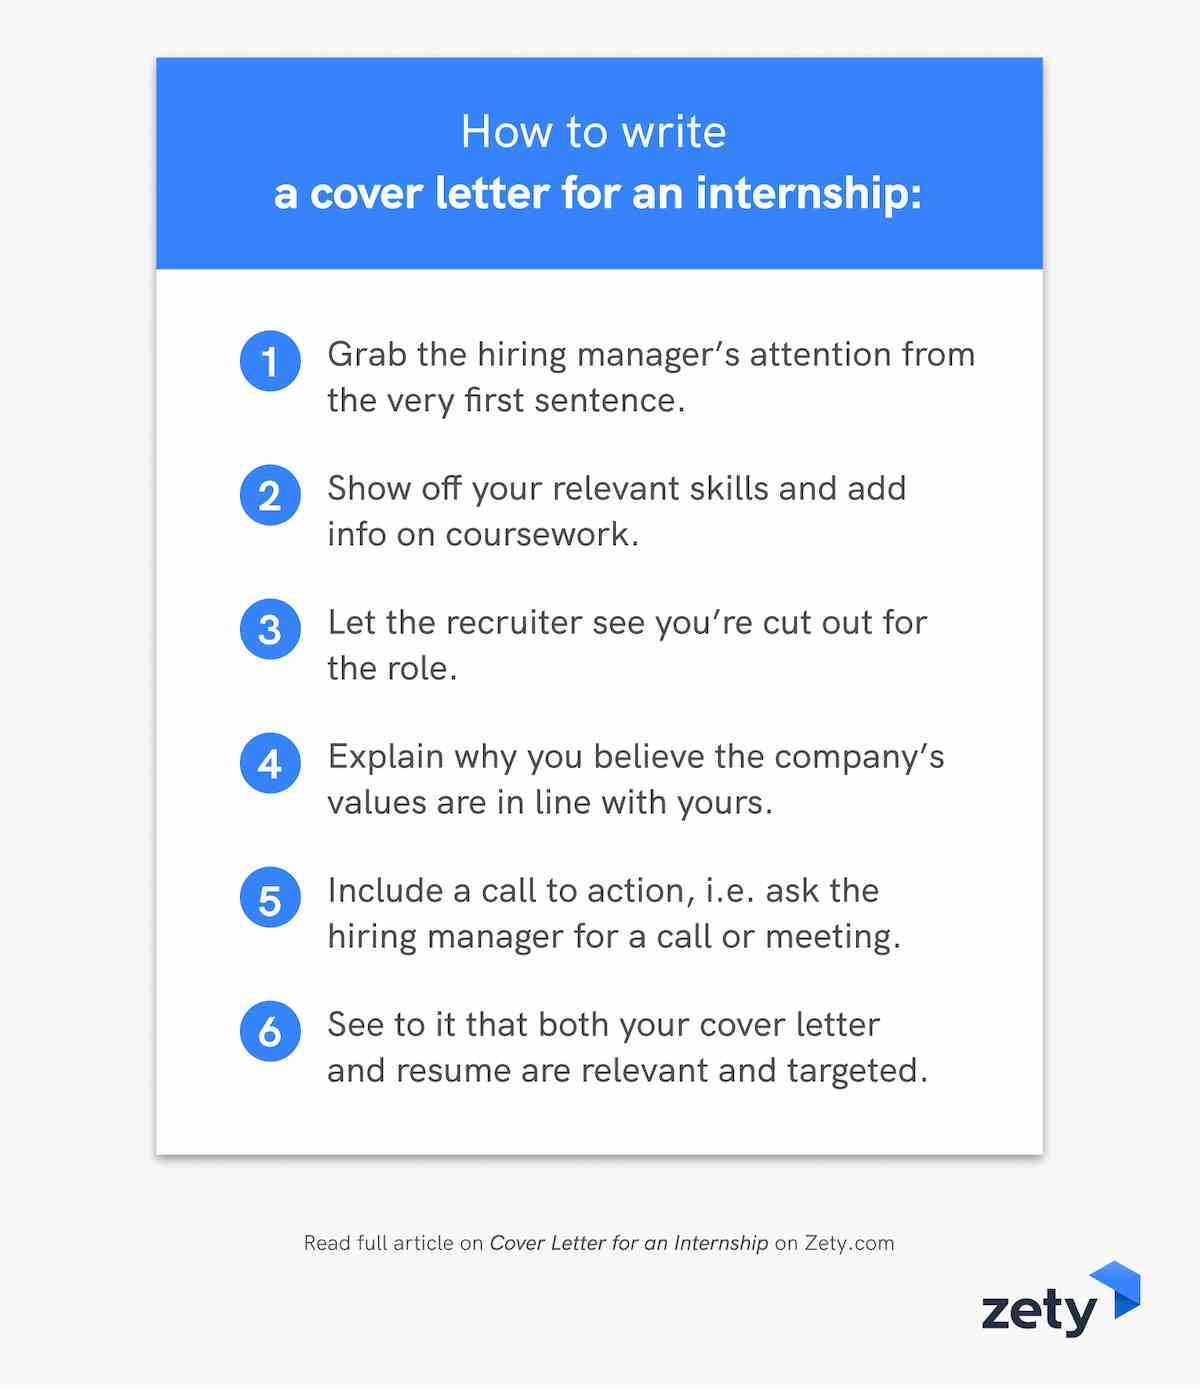 How to write a cover letter for an internship